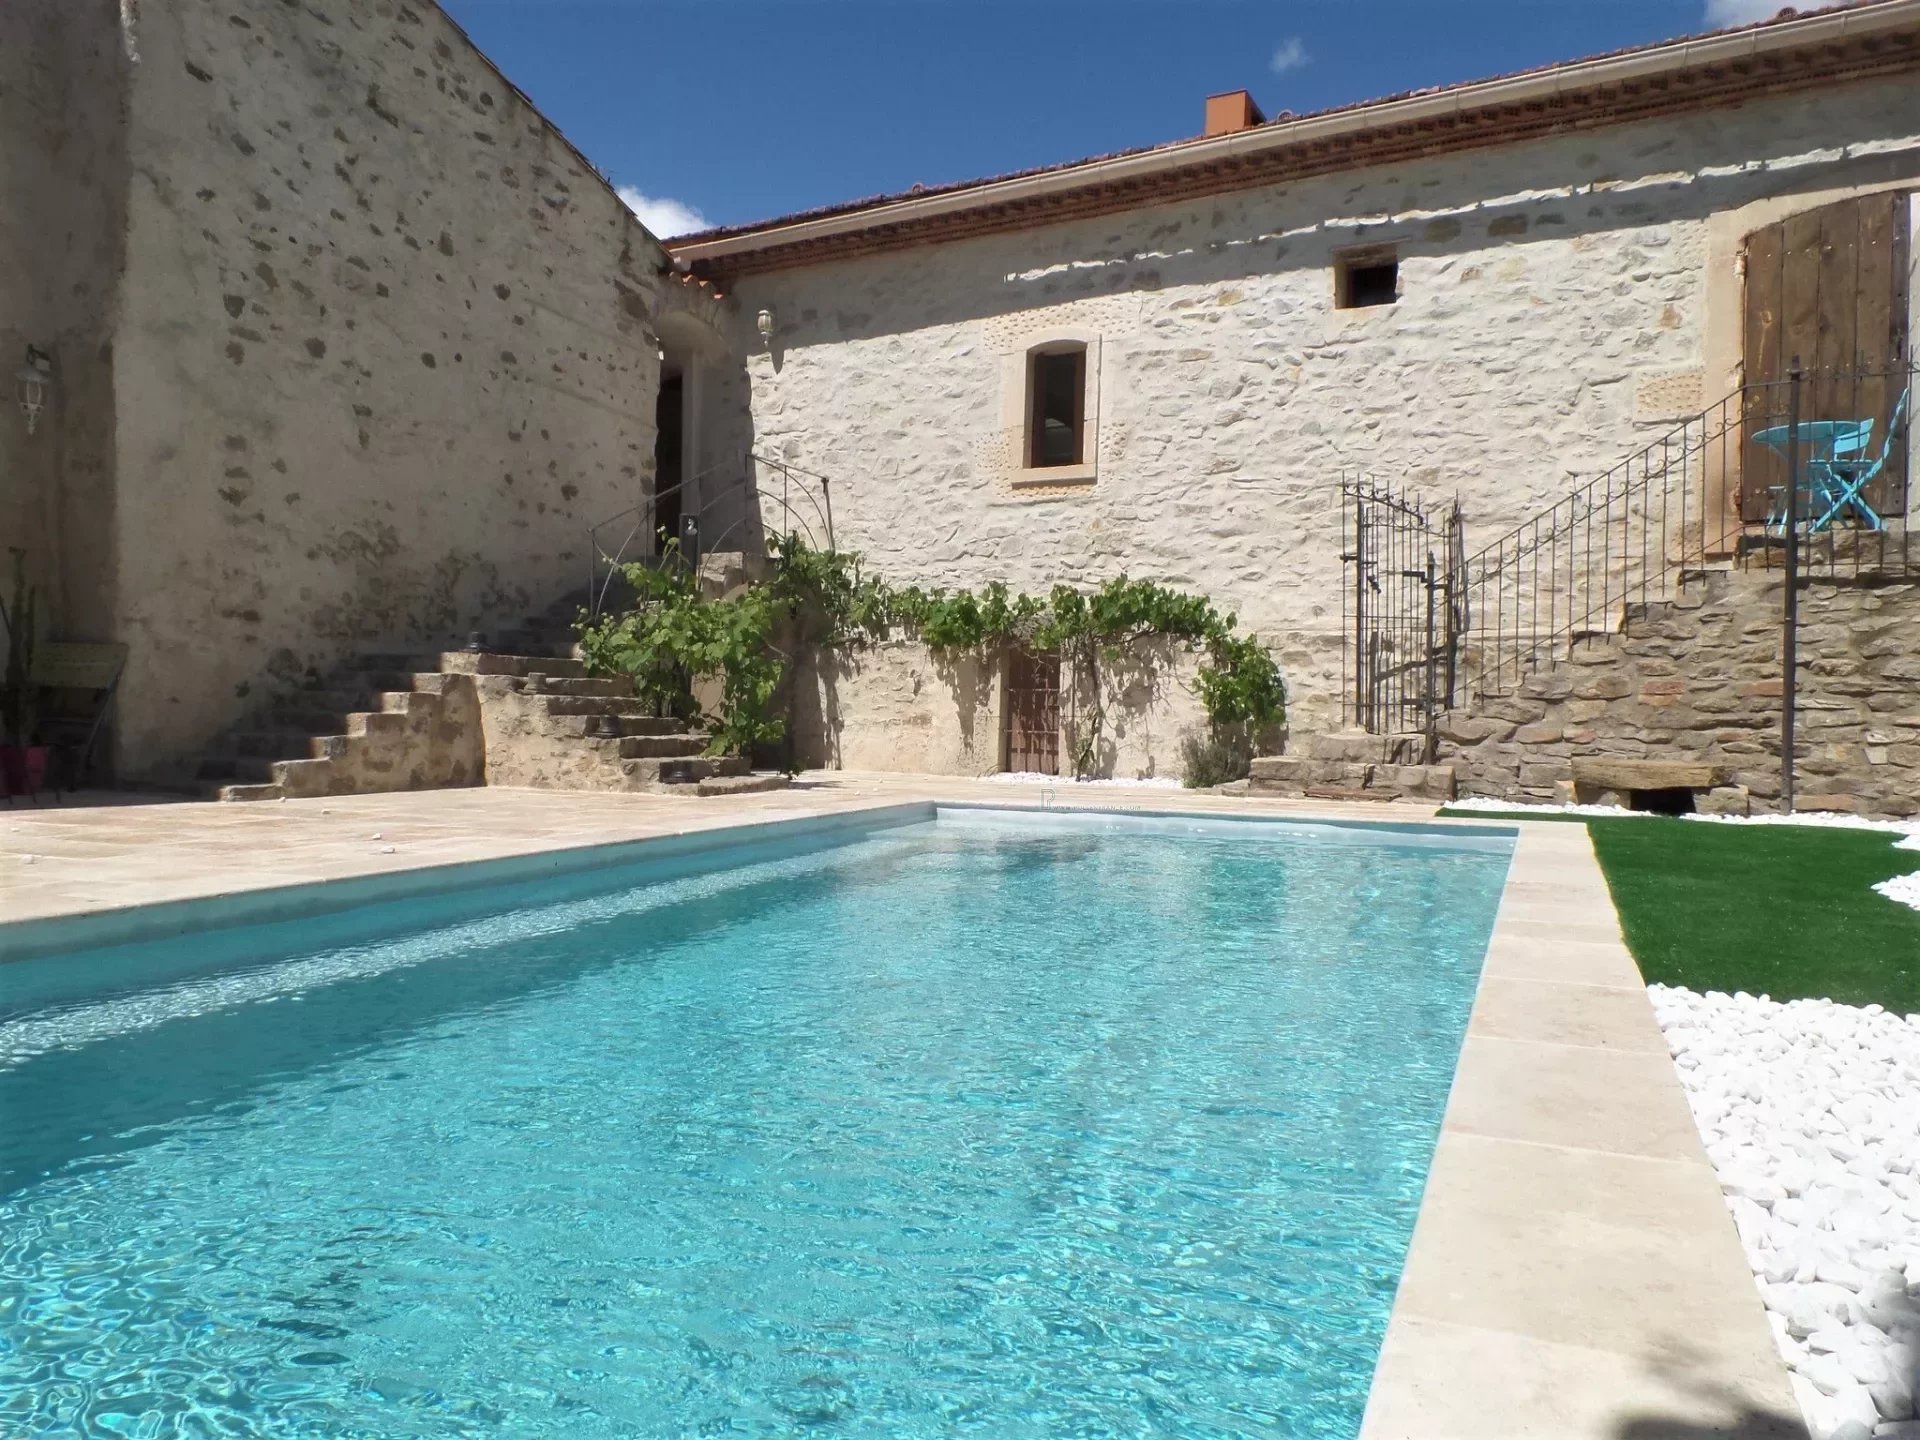 Exceptional barn conversion with gardens and large convertible space in popular Minervois village